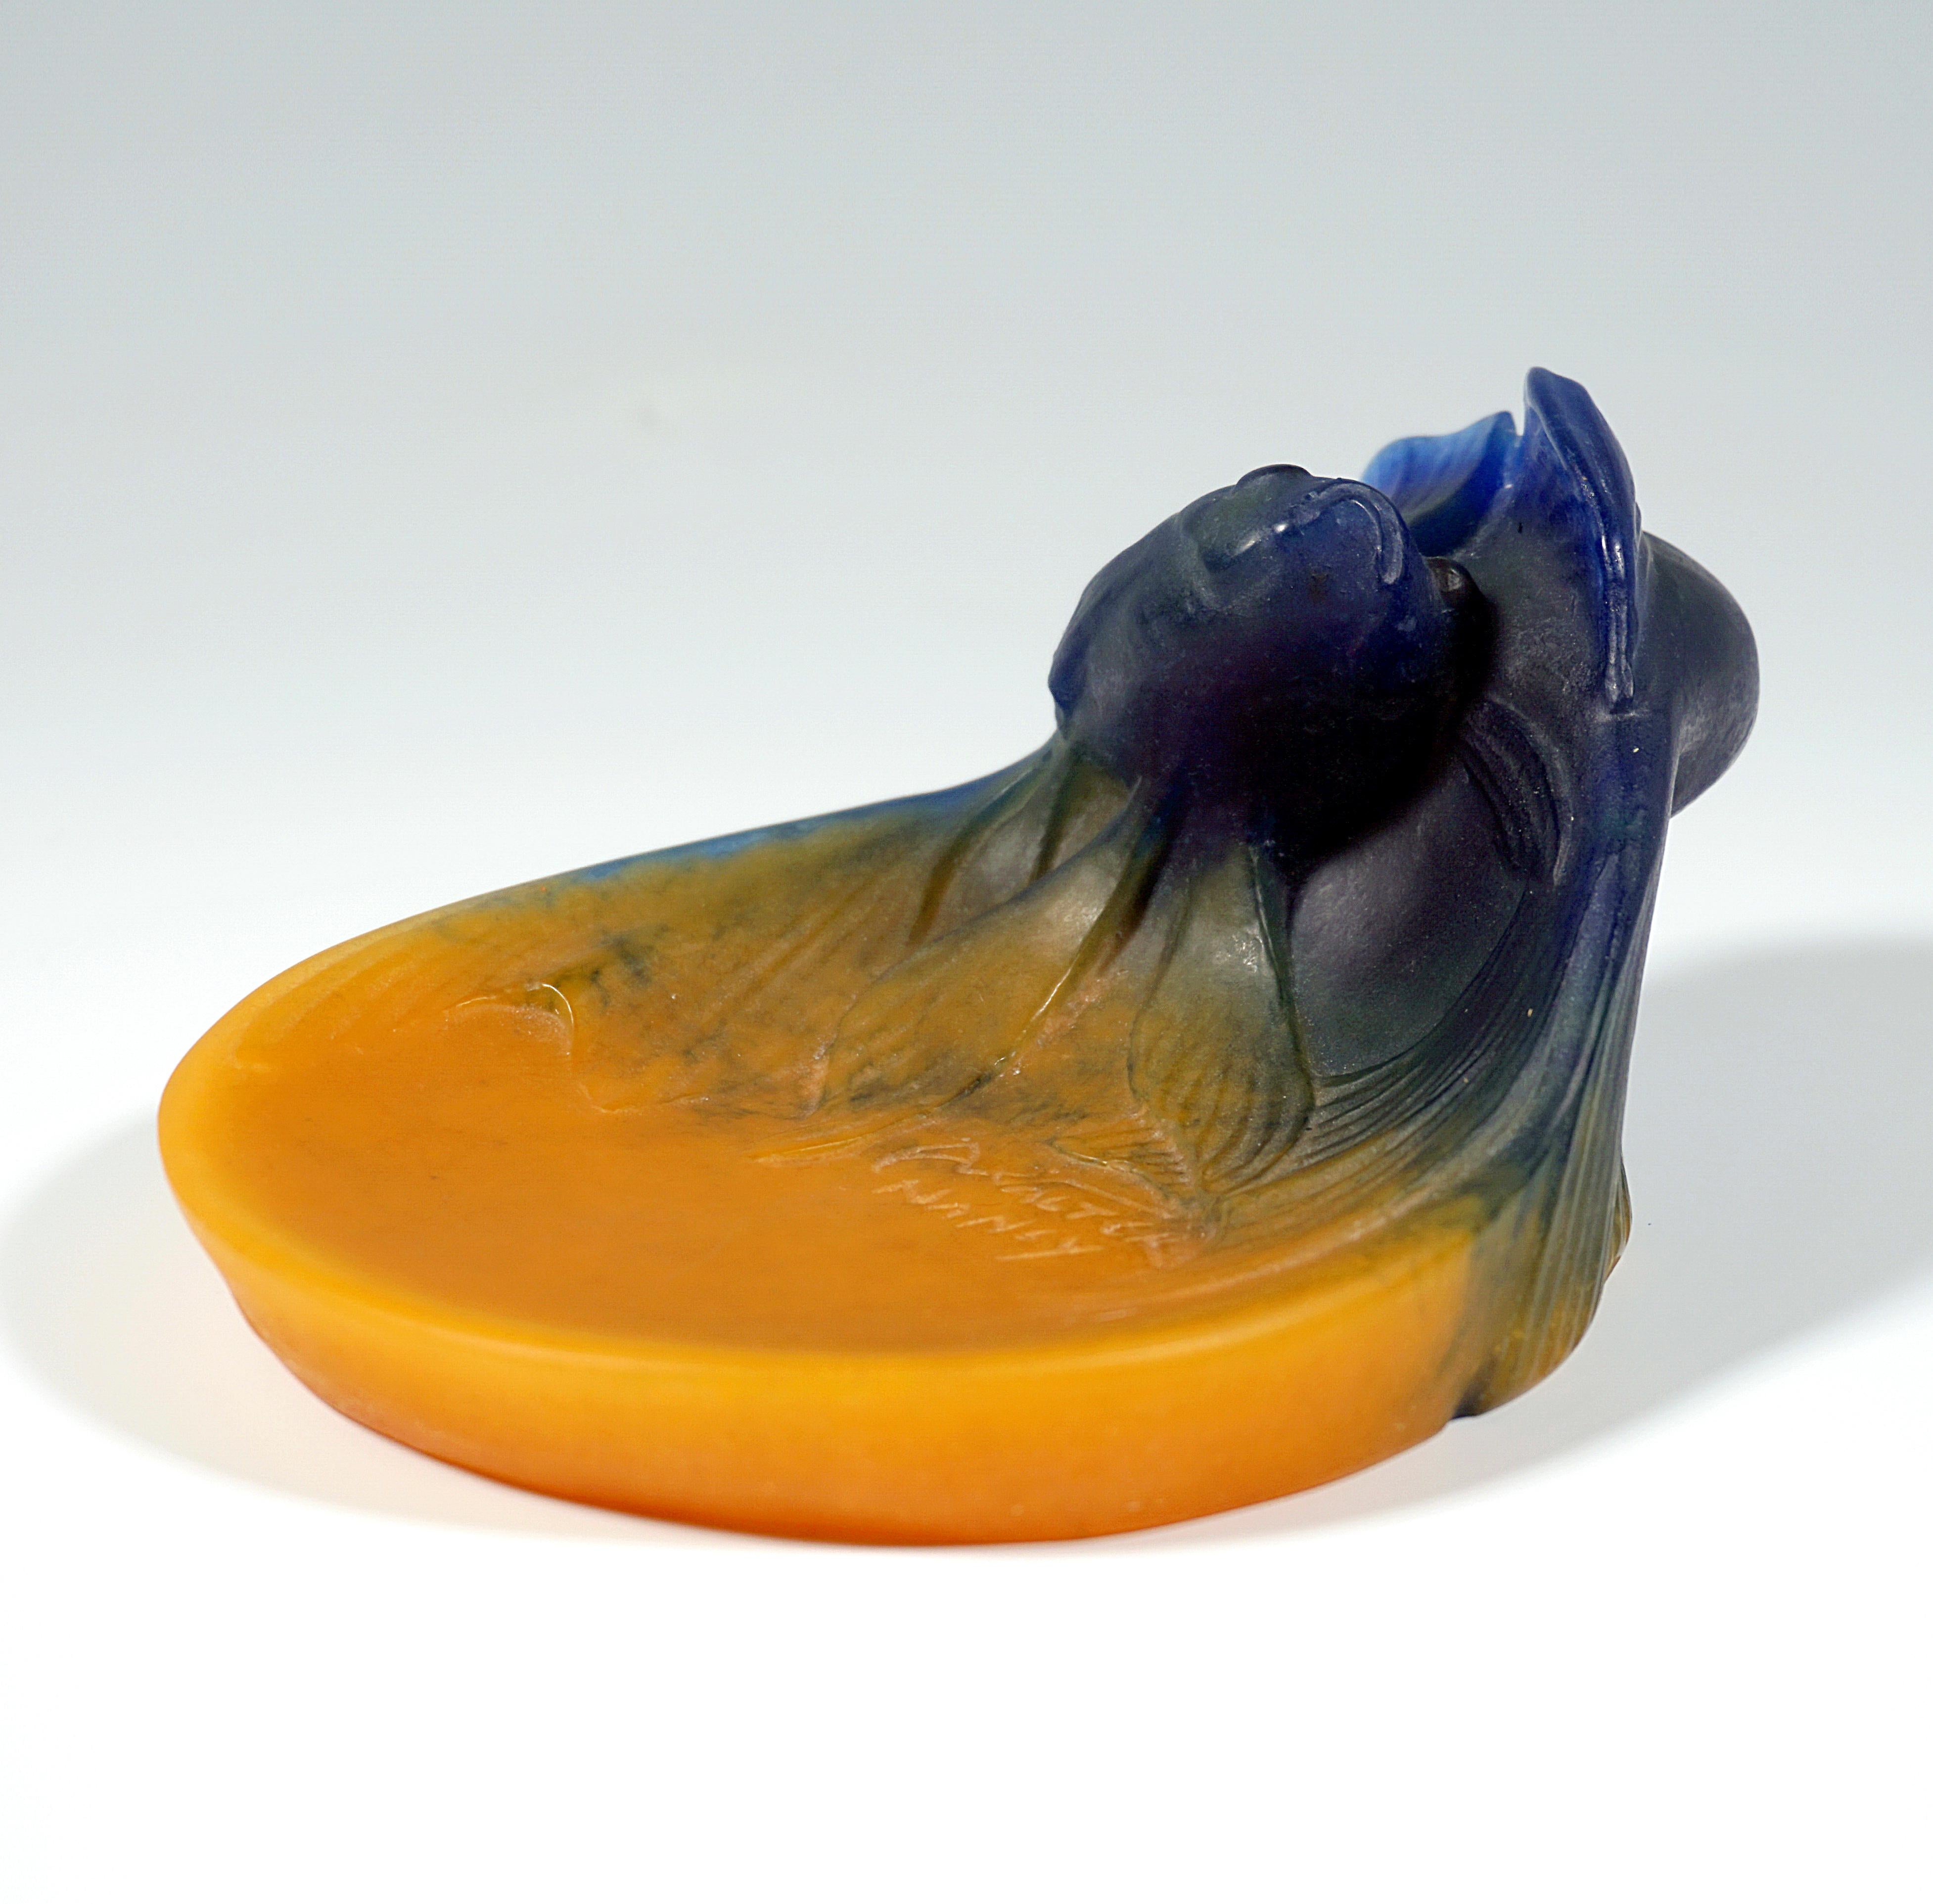 Decorative pâte-de-verre vide-poche: bowl in yolk yellow, one side overflowing in dark blue, swimming around each other, plastically formed goldfish couple.
Signed 'AWALTER NANCY' on the top.

Manufactory: Amalric Walter, Nancy, Lorraine,